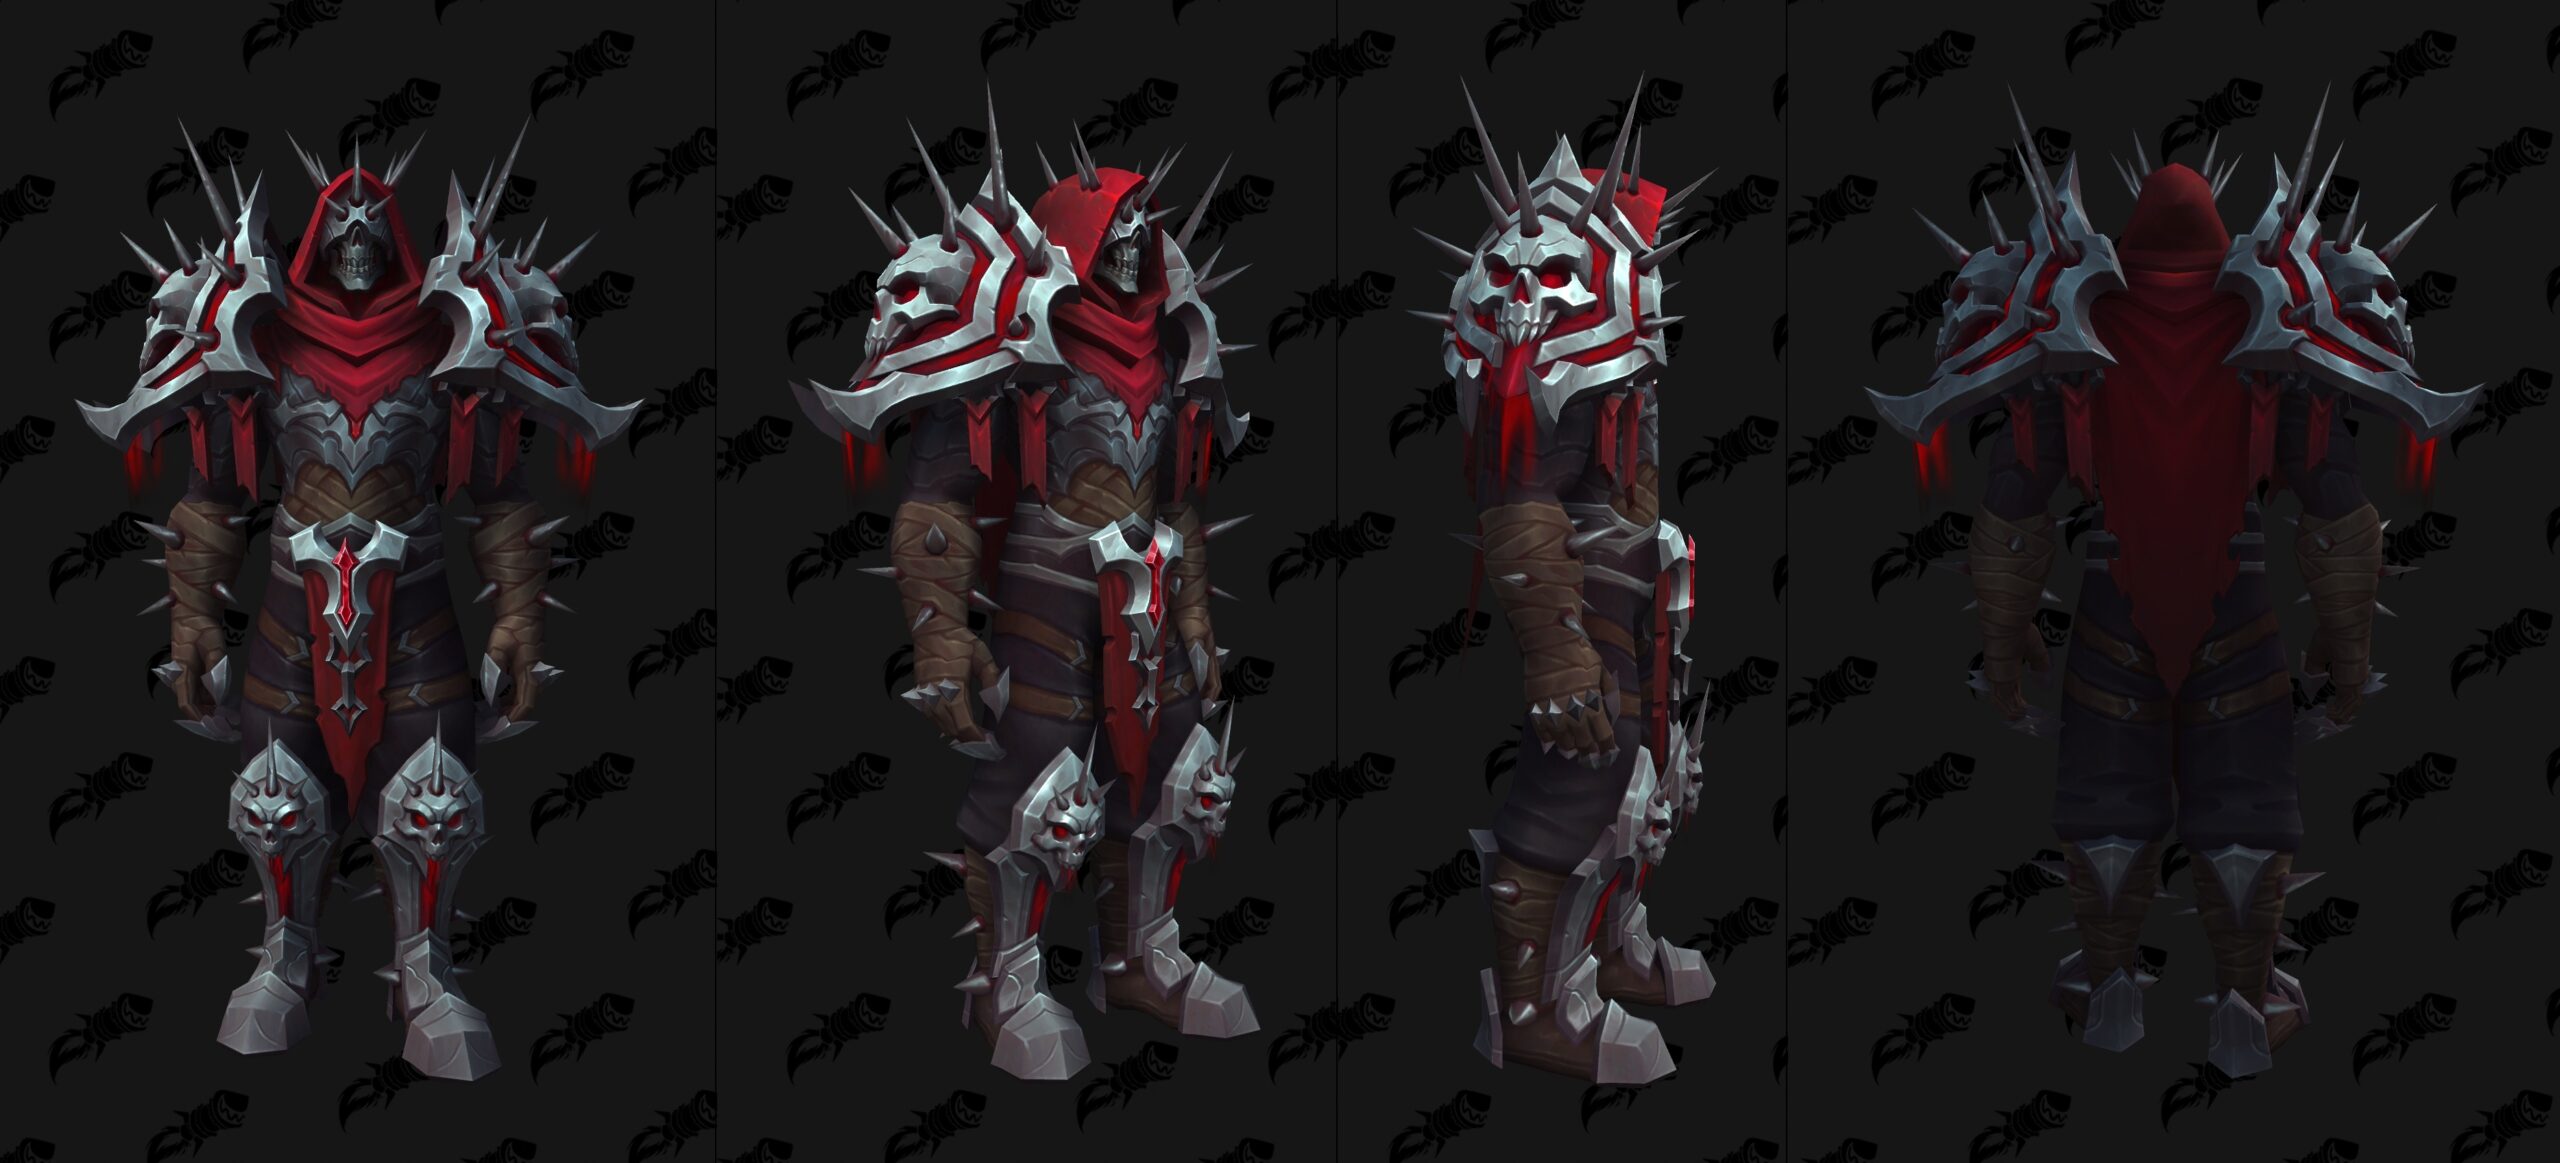 All Death Knight Tier Sets in Dragonflight Patch 10.2